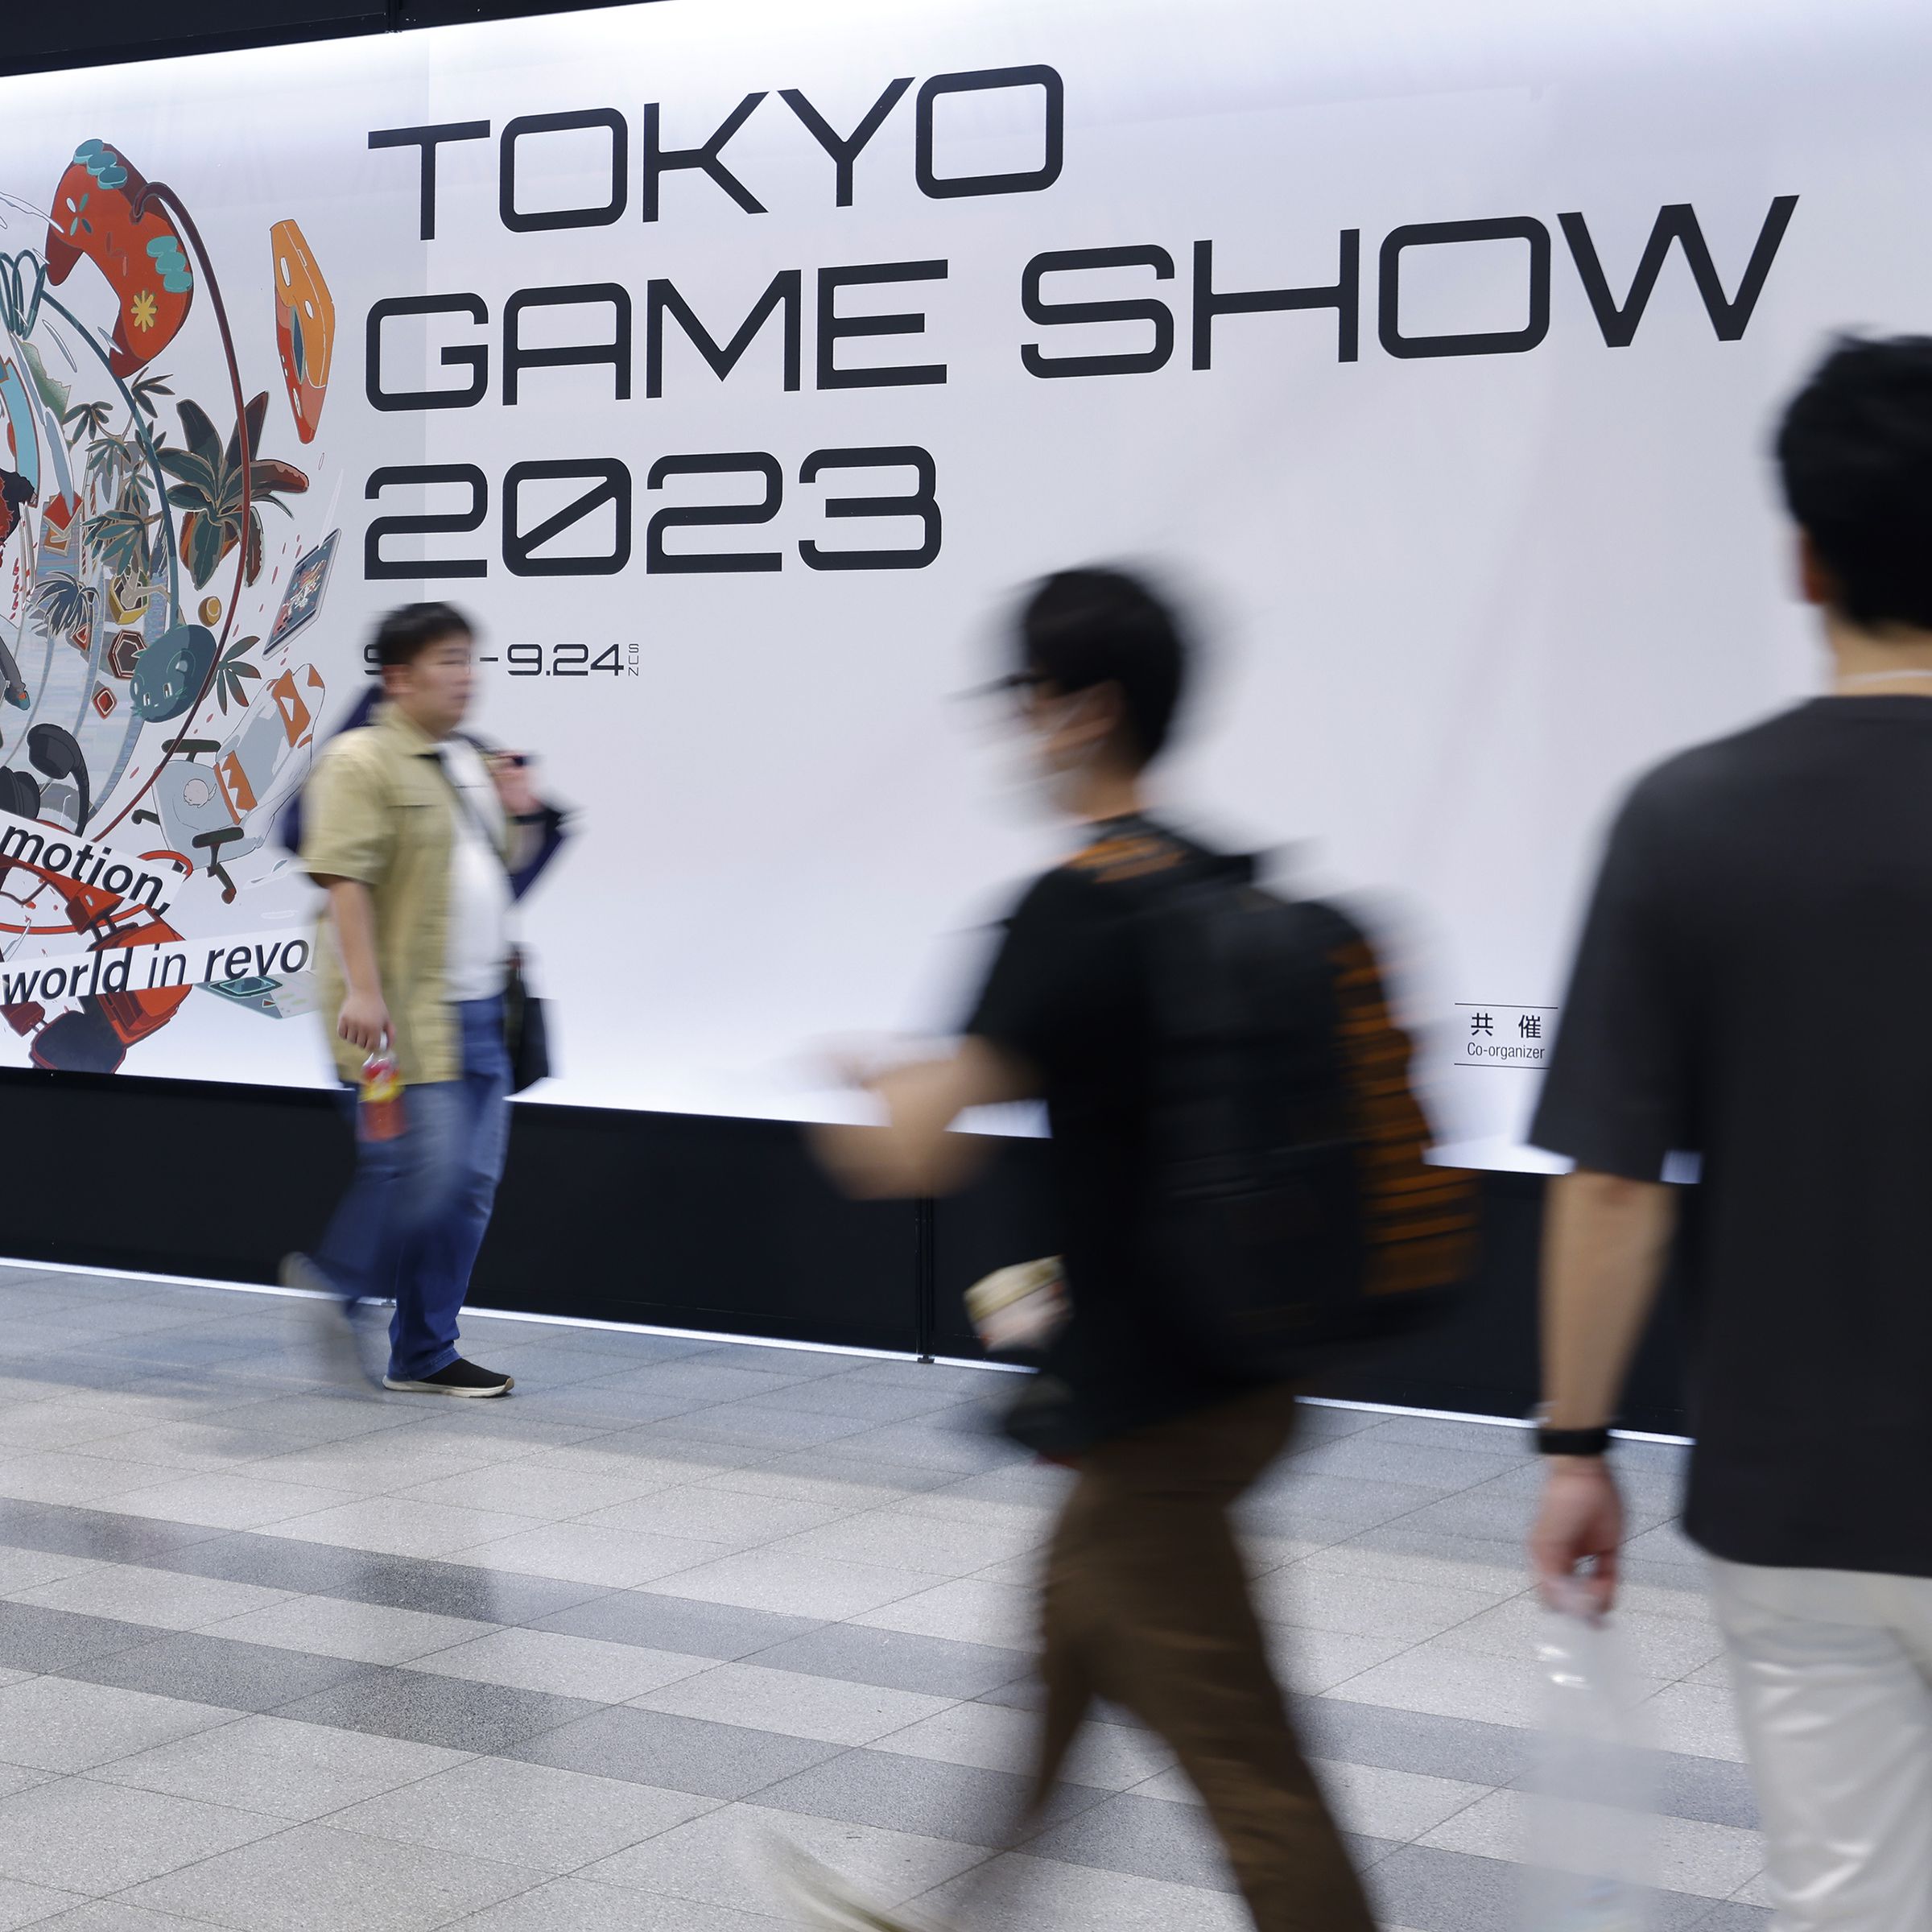 A photo of a sign at the 2023 edition of Tokyo Game Show.